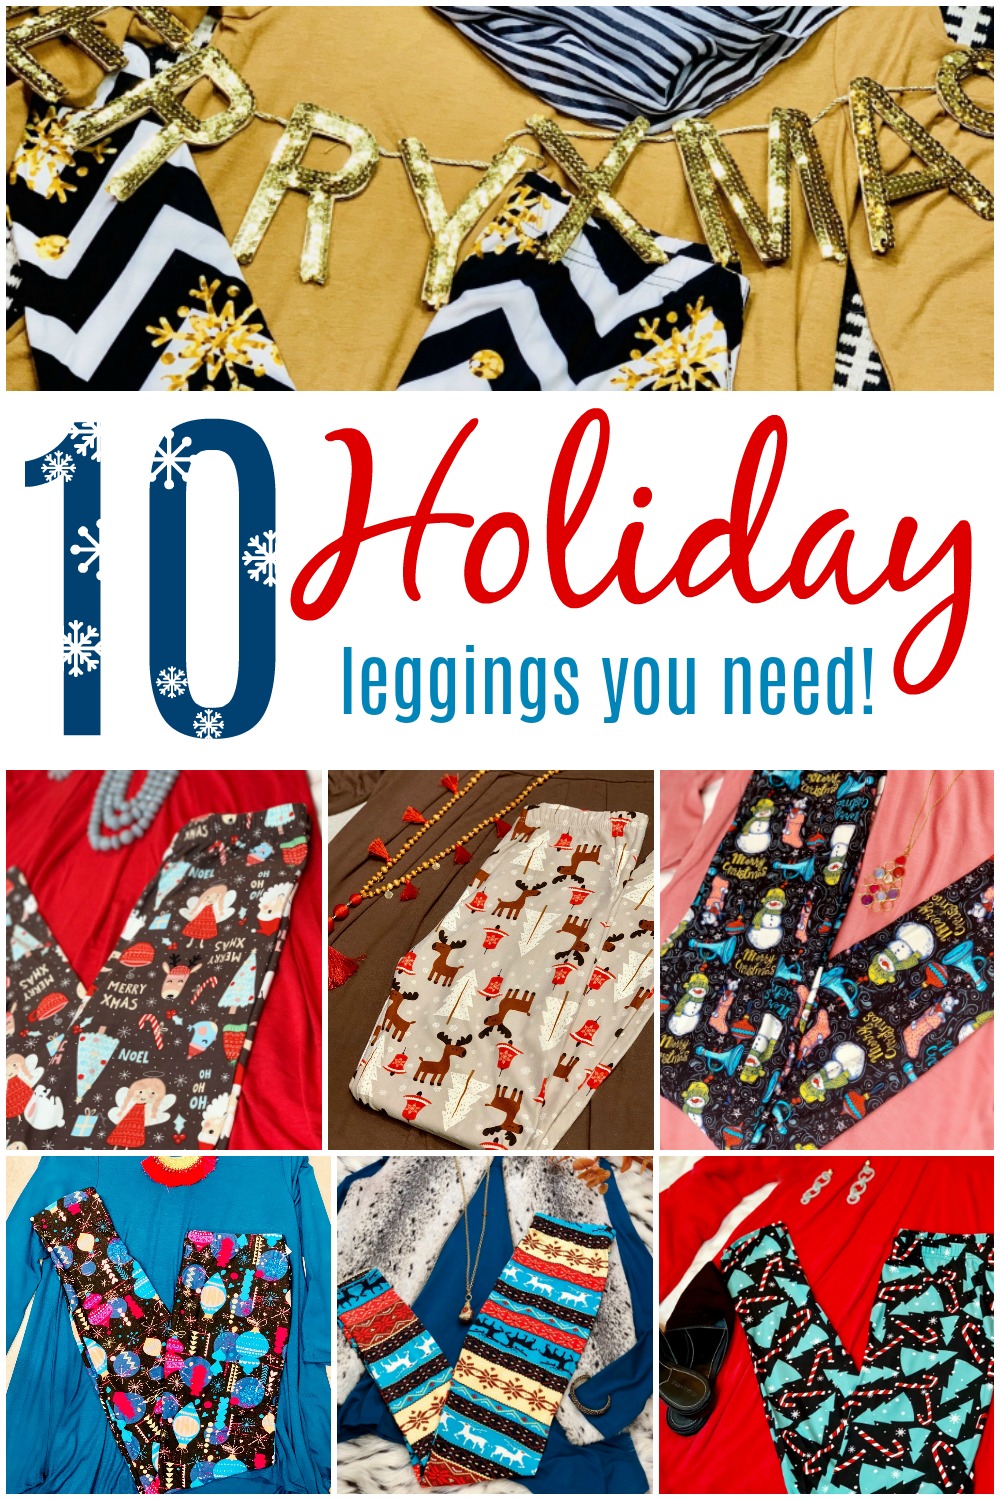 10 Christmas Leggings You Can't Live without! #DreamLeggings #ChristmasforHer